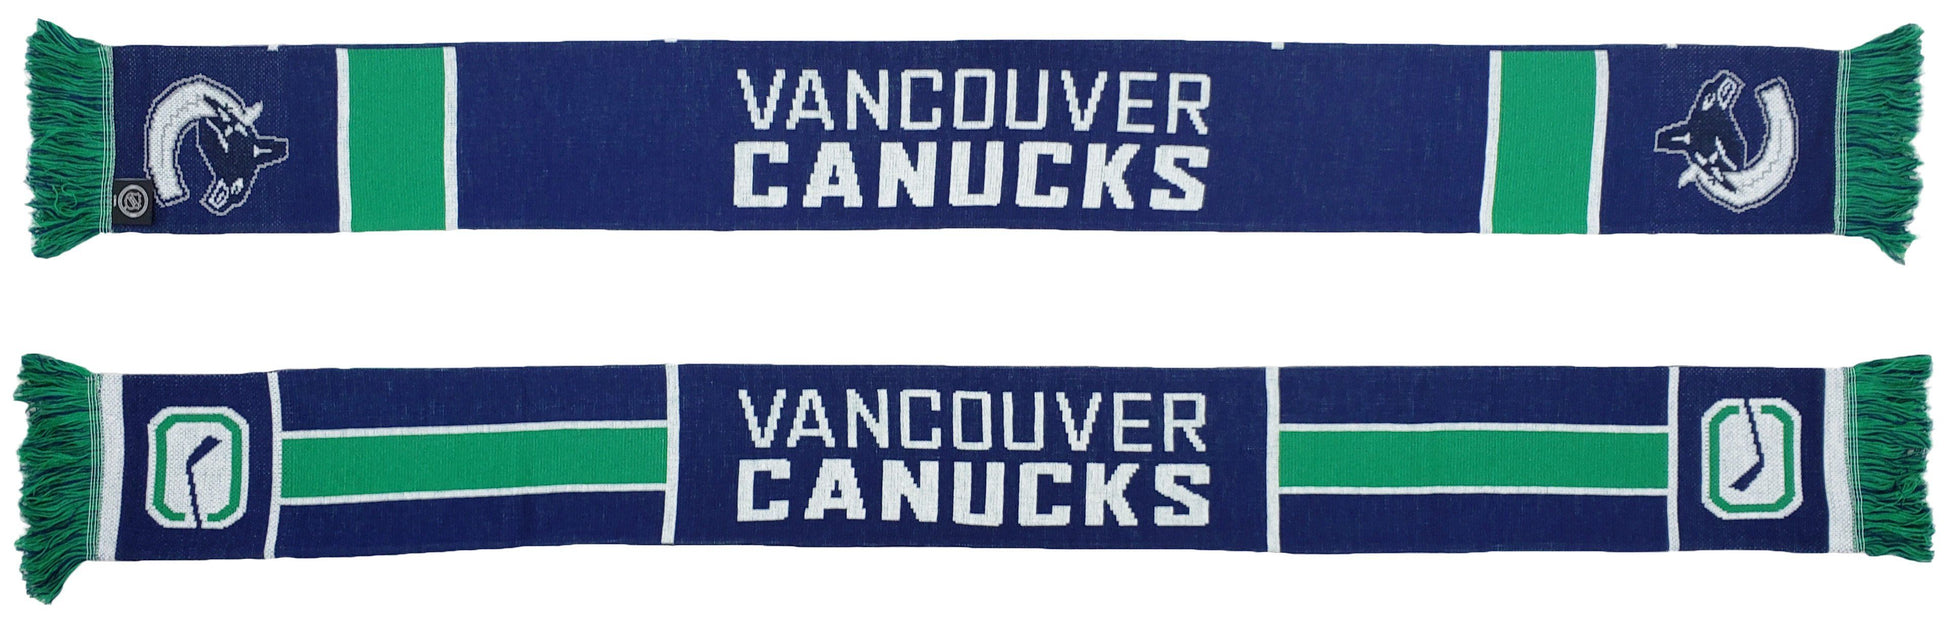 VANCOUVER CANUCKS SCARF - Home Jersey